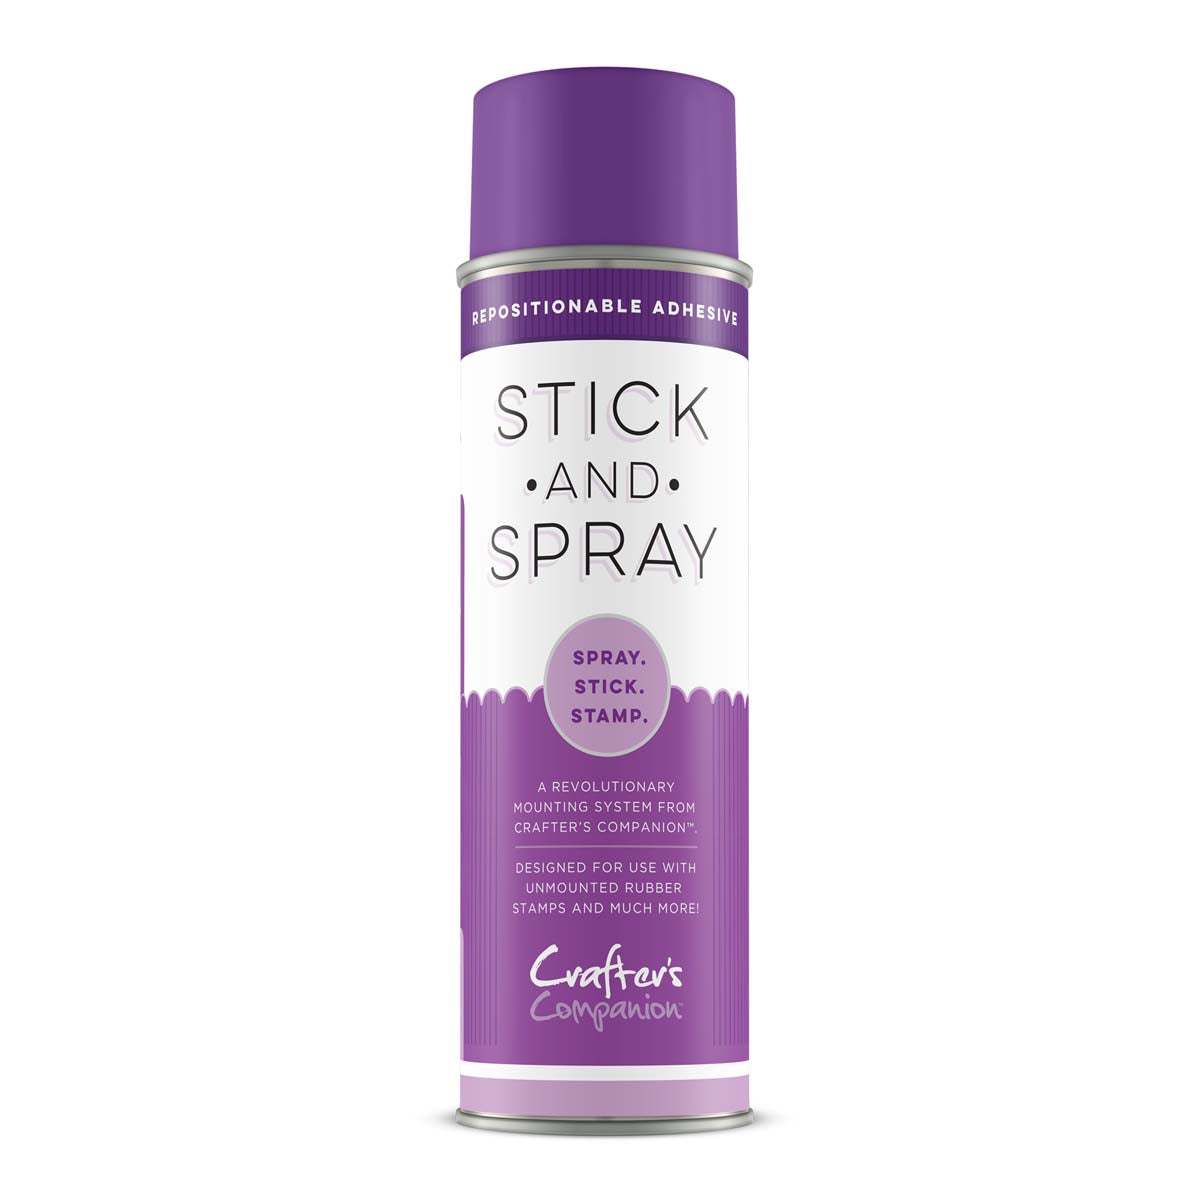 Crafter's Companion - Stick and Spray Mounting Adesive (Purple Can)